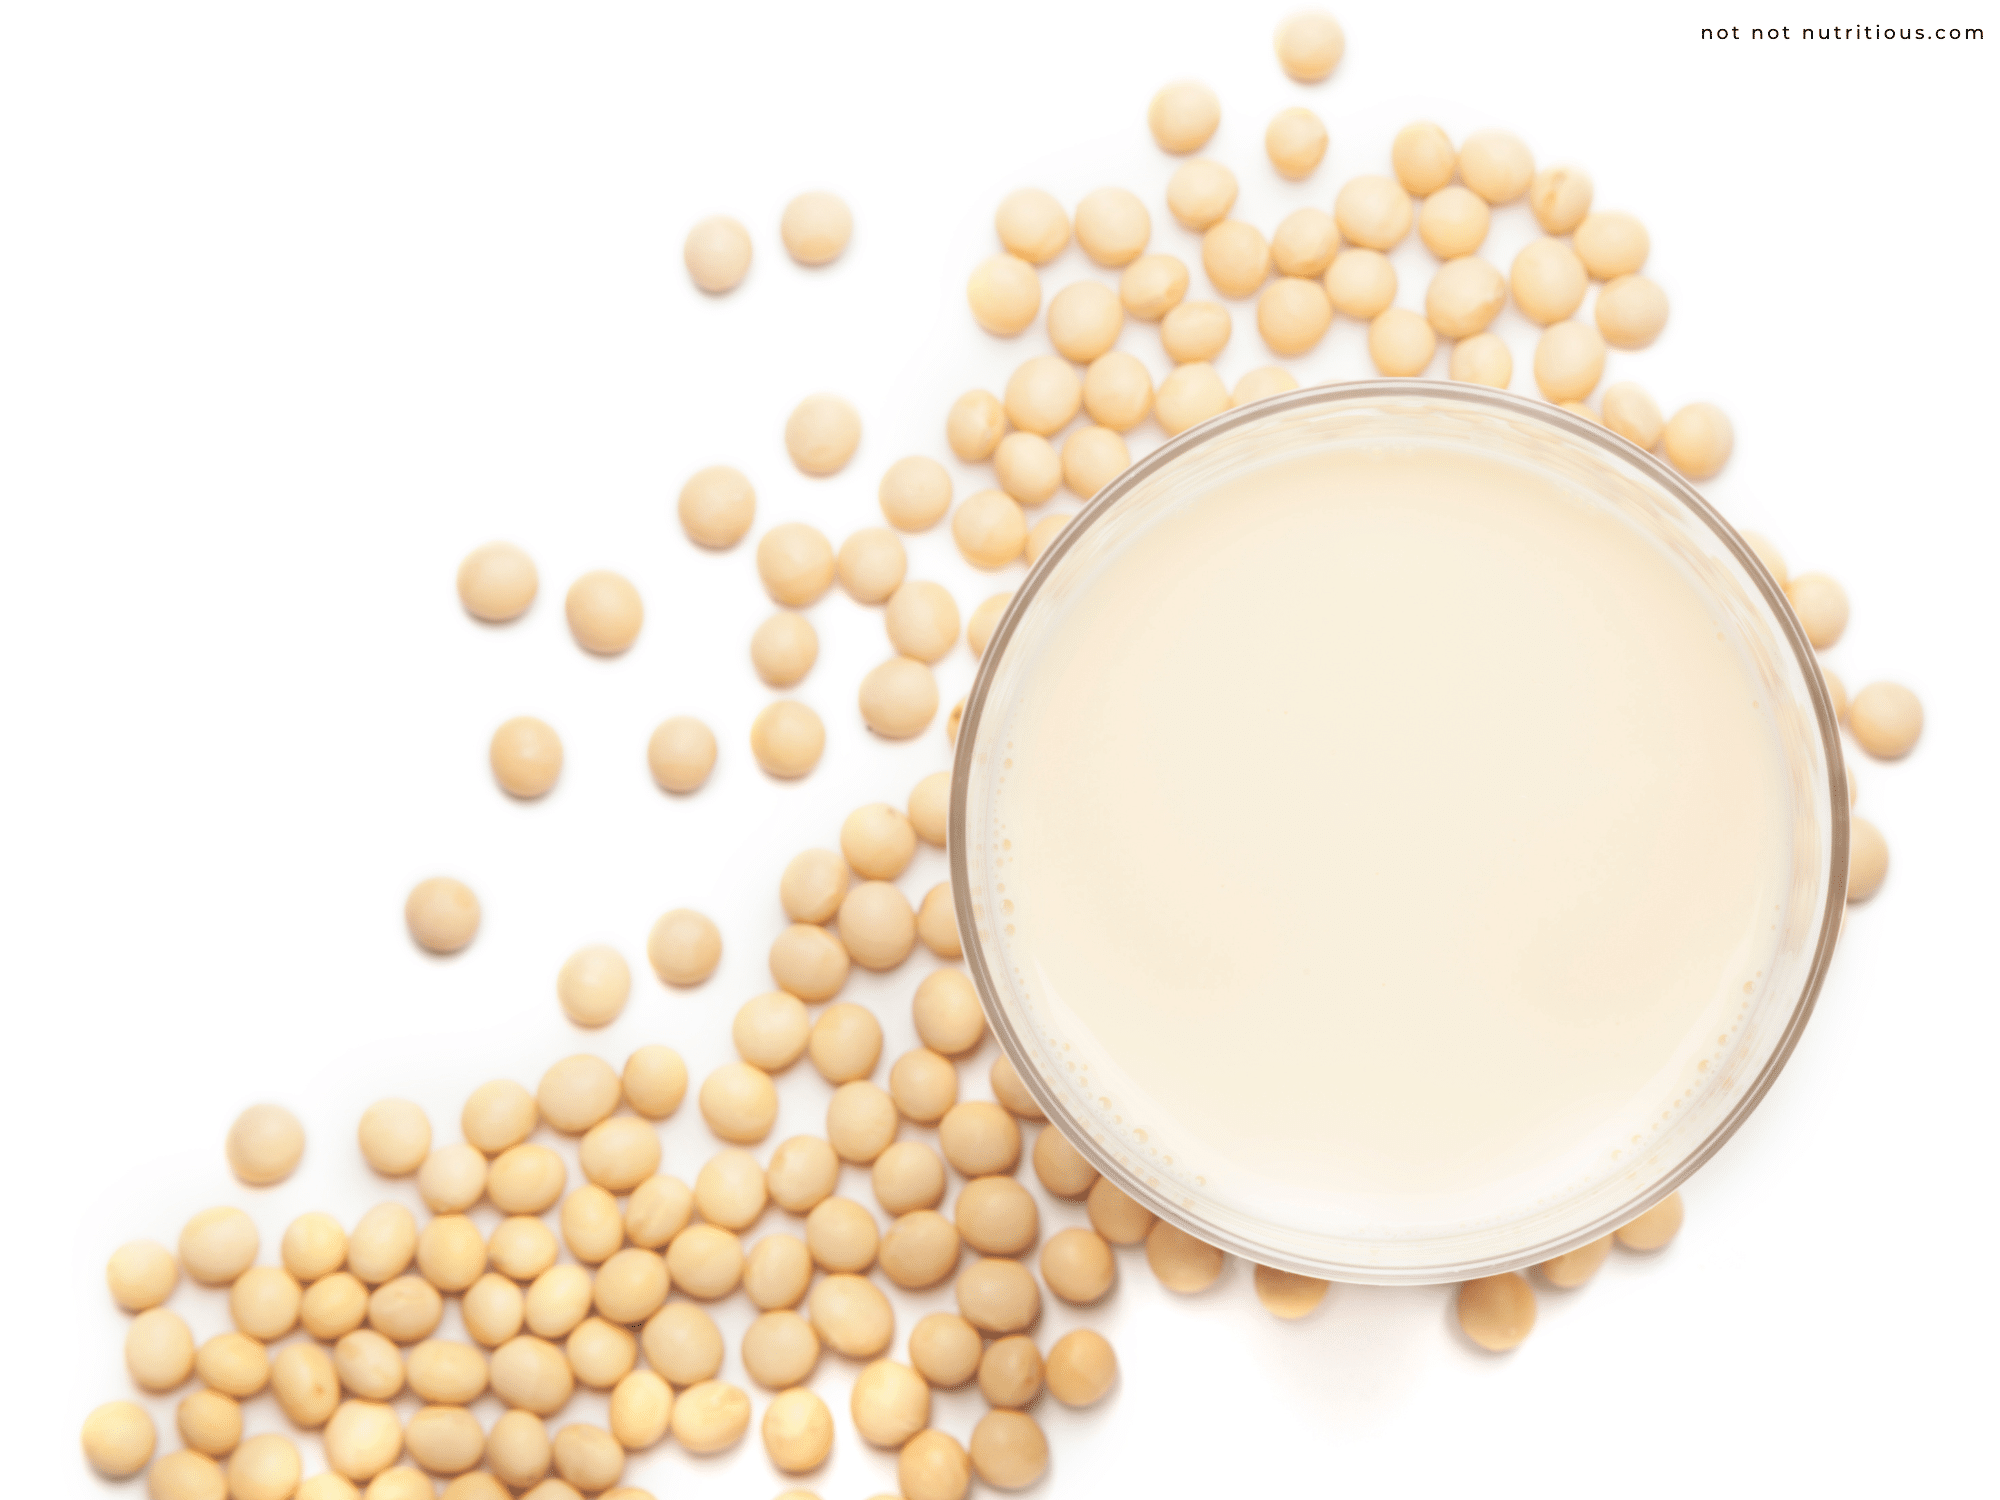 top down view of a glass of soy milk and some soy beans